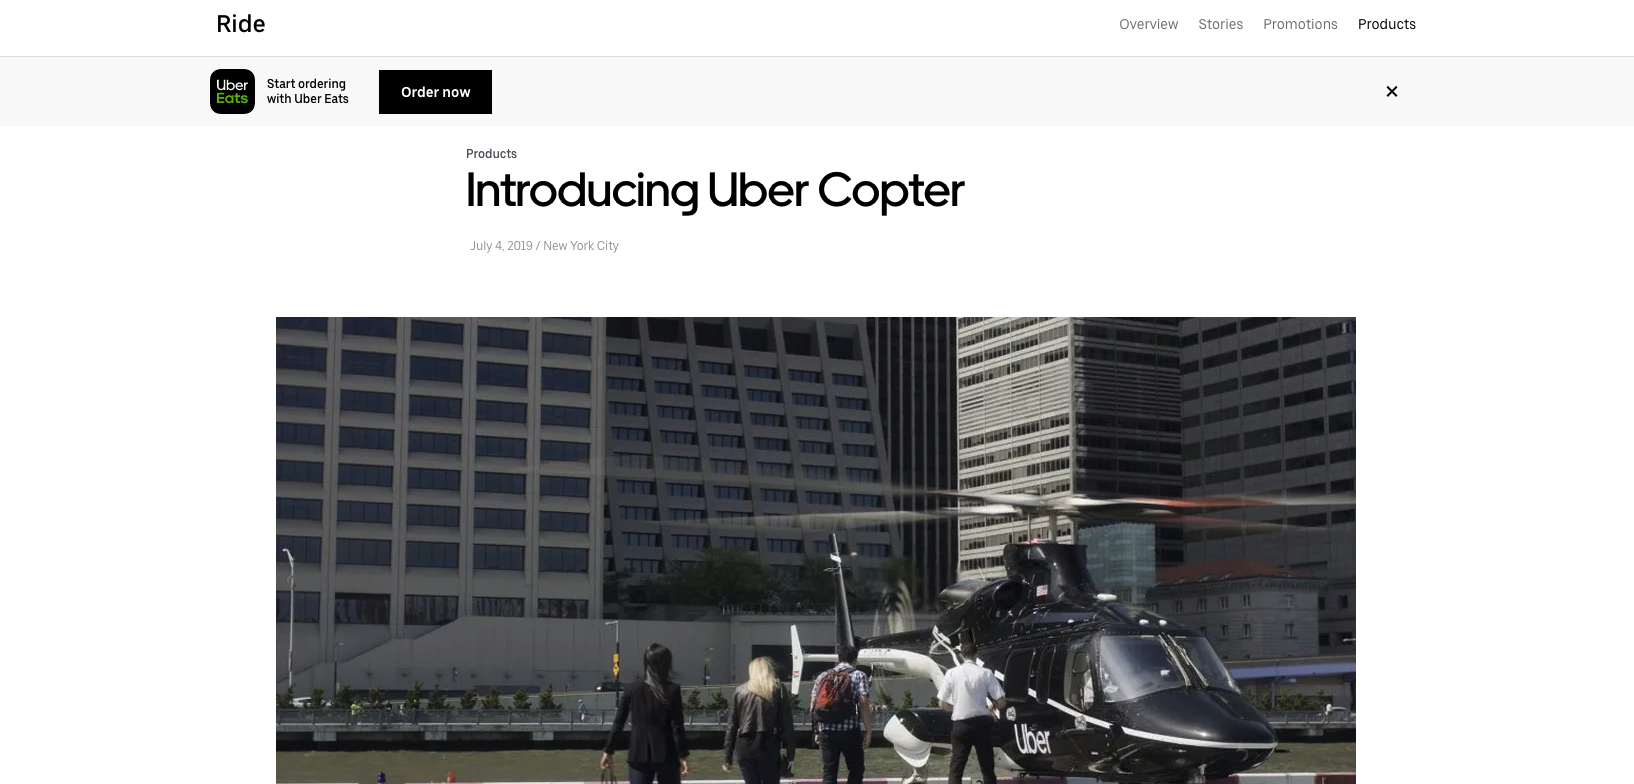 uber helicopter